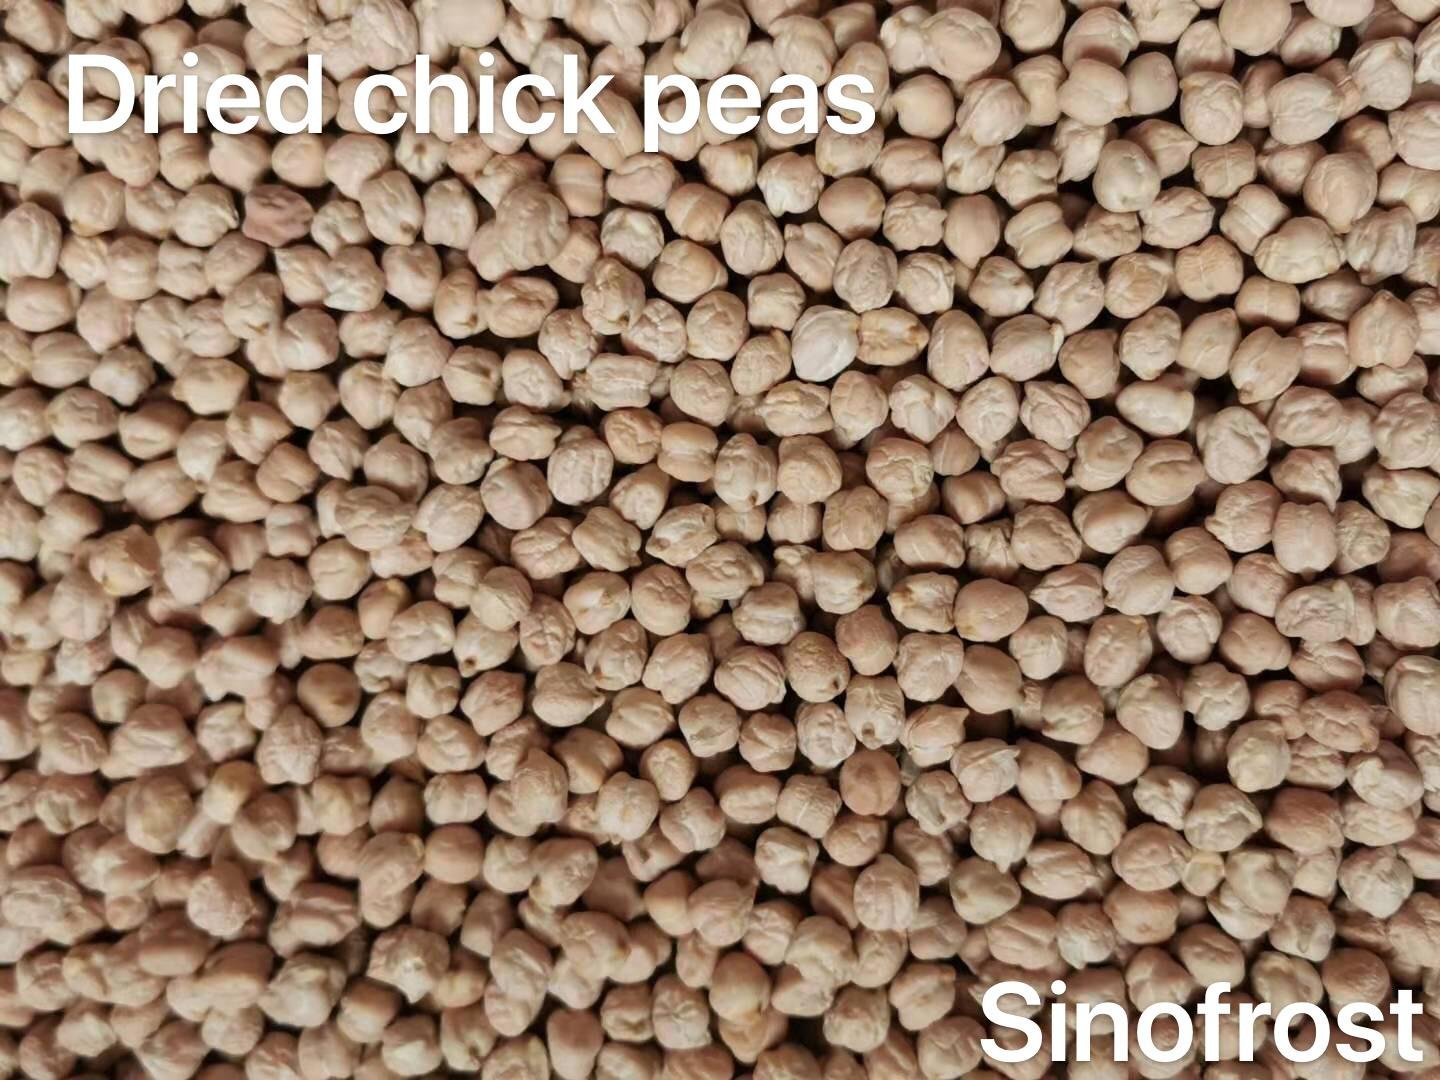 IQF Chick Peas,Frozen Chick Peas,cooked 2